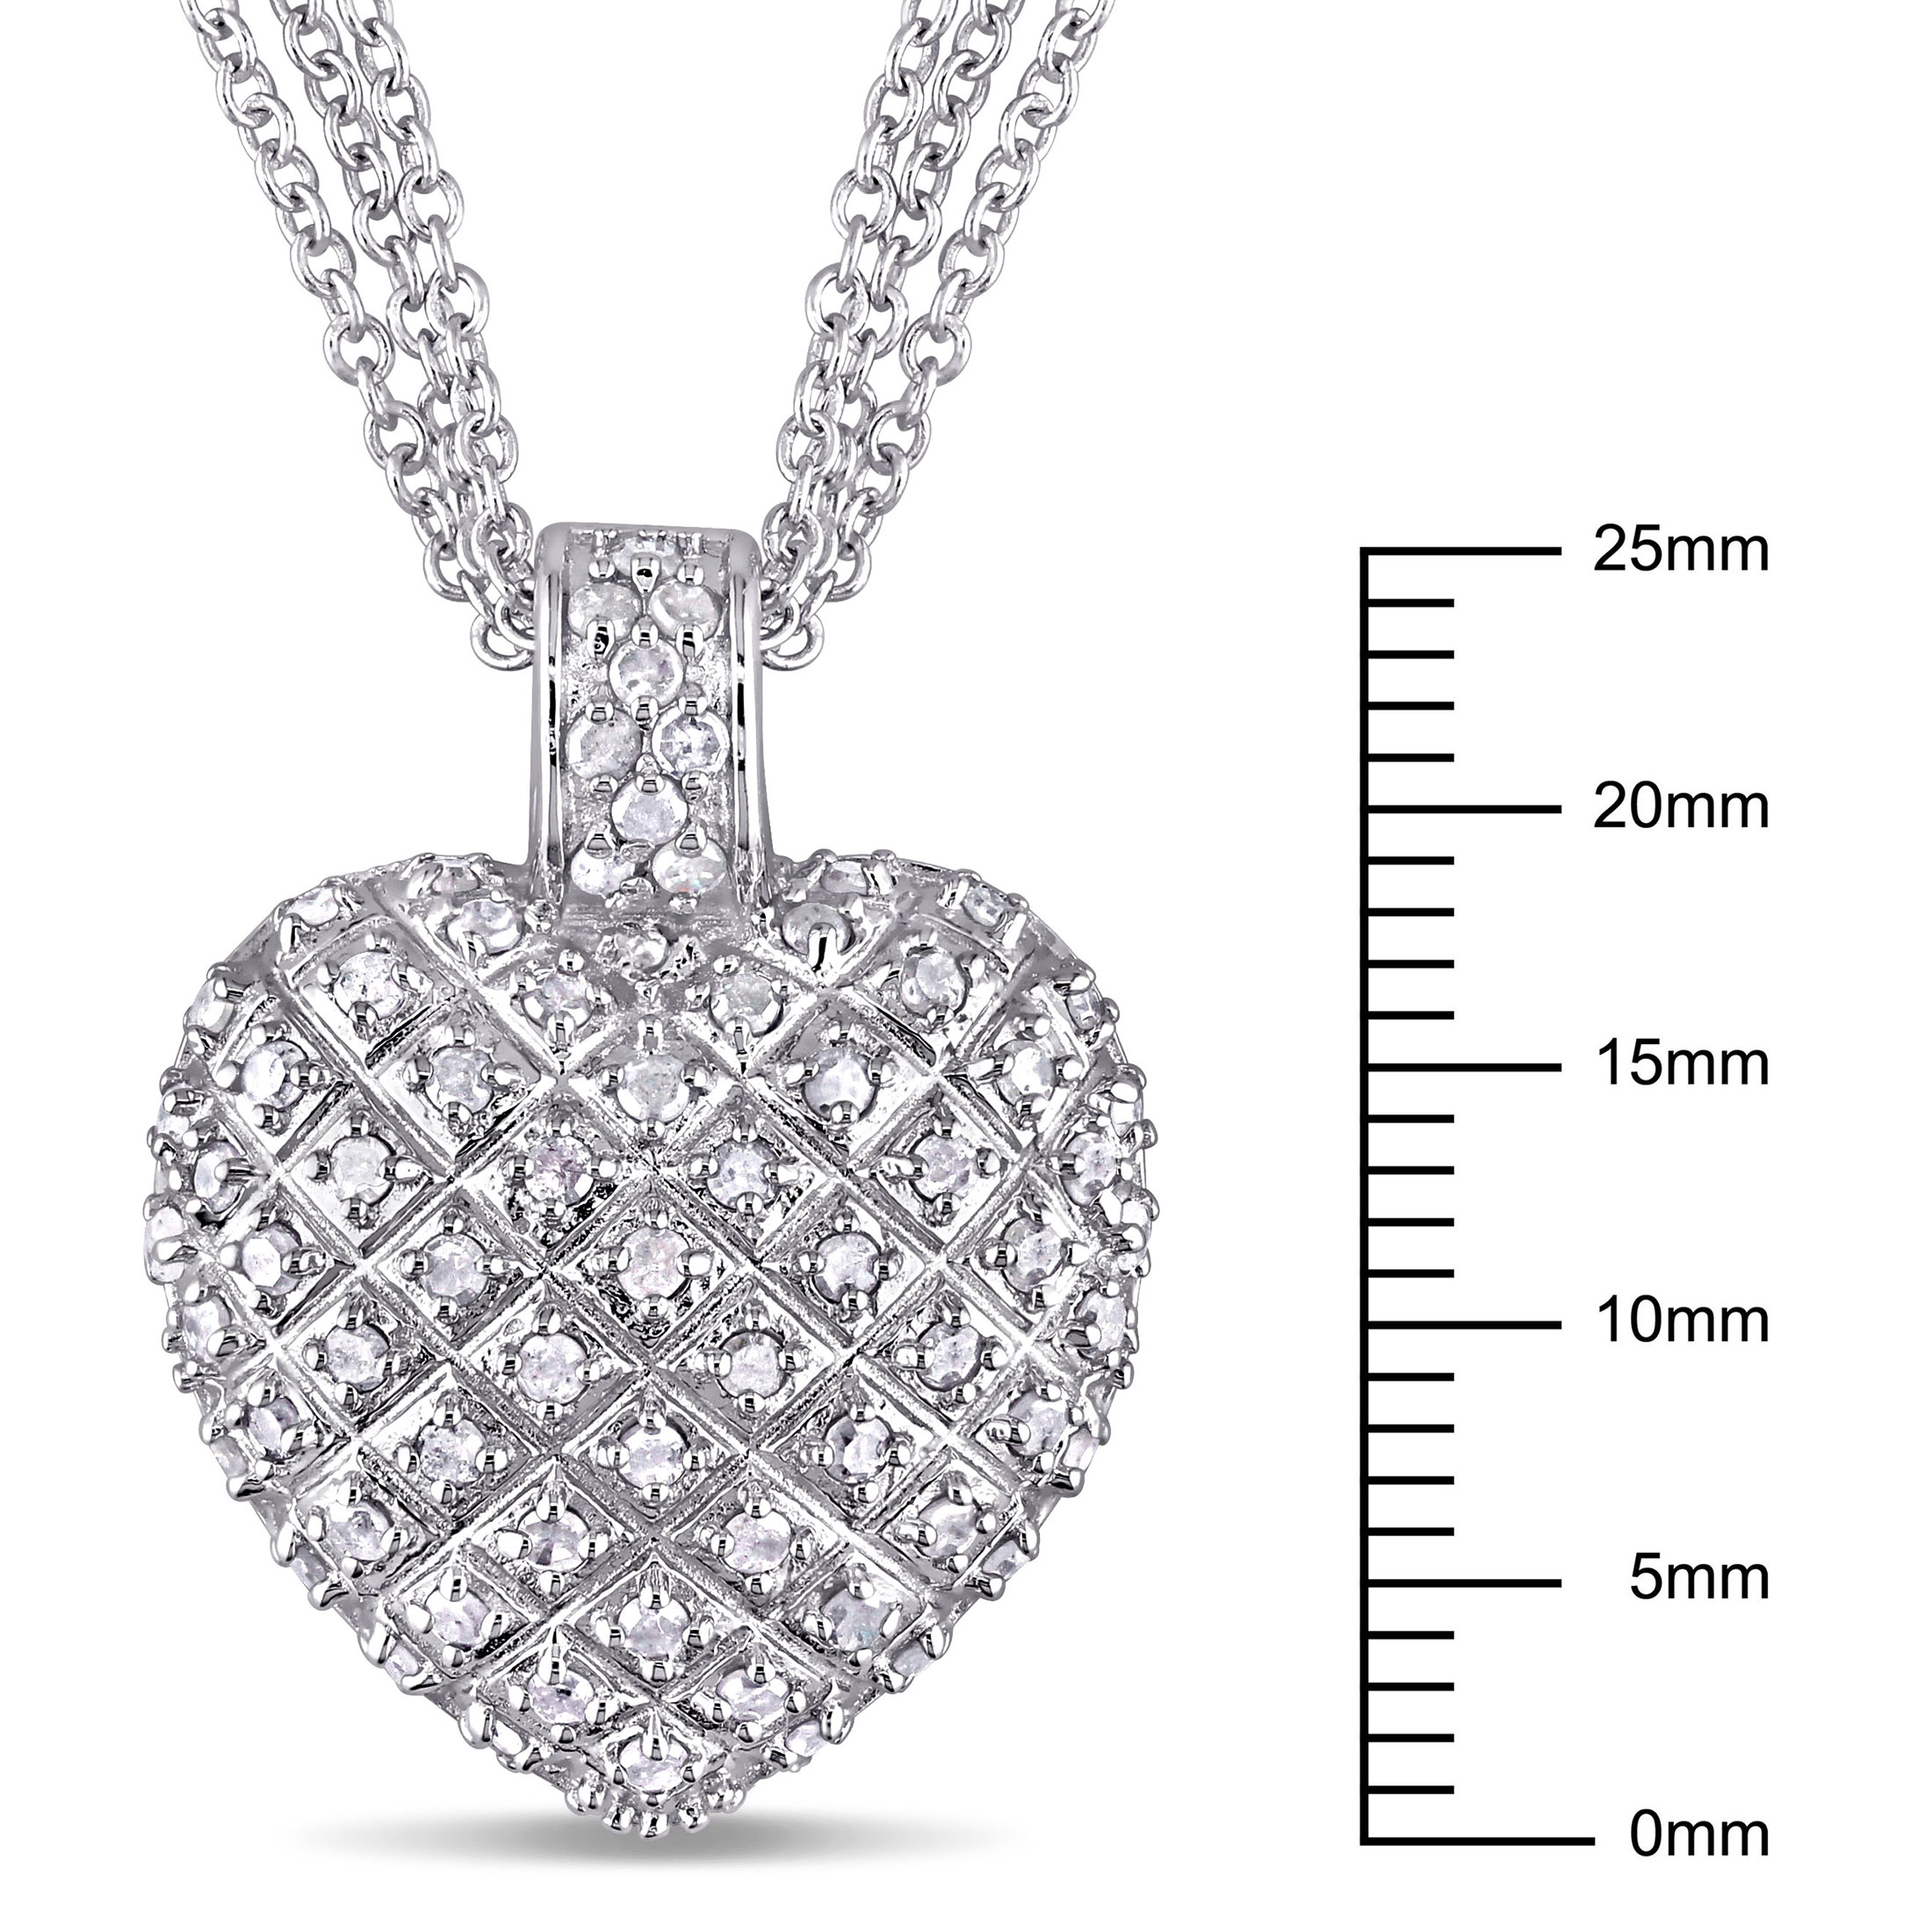 Everly Women's 1 Carat T.W. Round-Cut Diamond Sterling Silver Clustered Heart Necklace with Pave Setting and Lobster Clasp (H-I-J, I3) - 17 in. - image 3 of 8